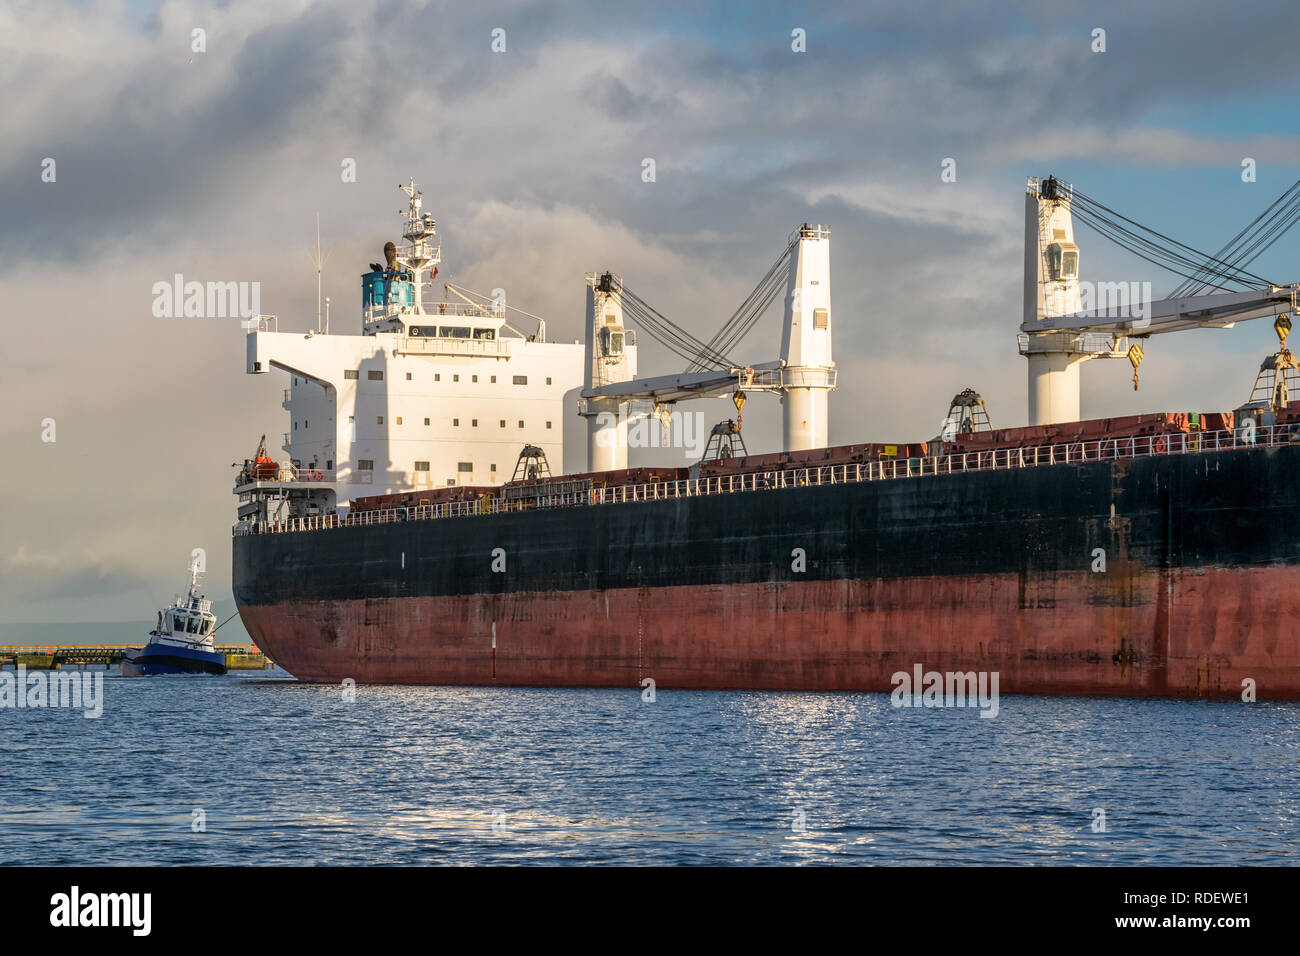 A picture of a cargo ship coming into harbour being towed by a tug boat Stock Photo